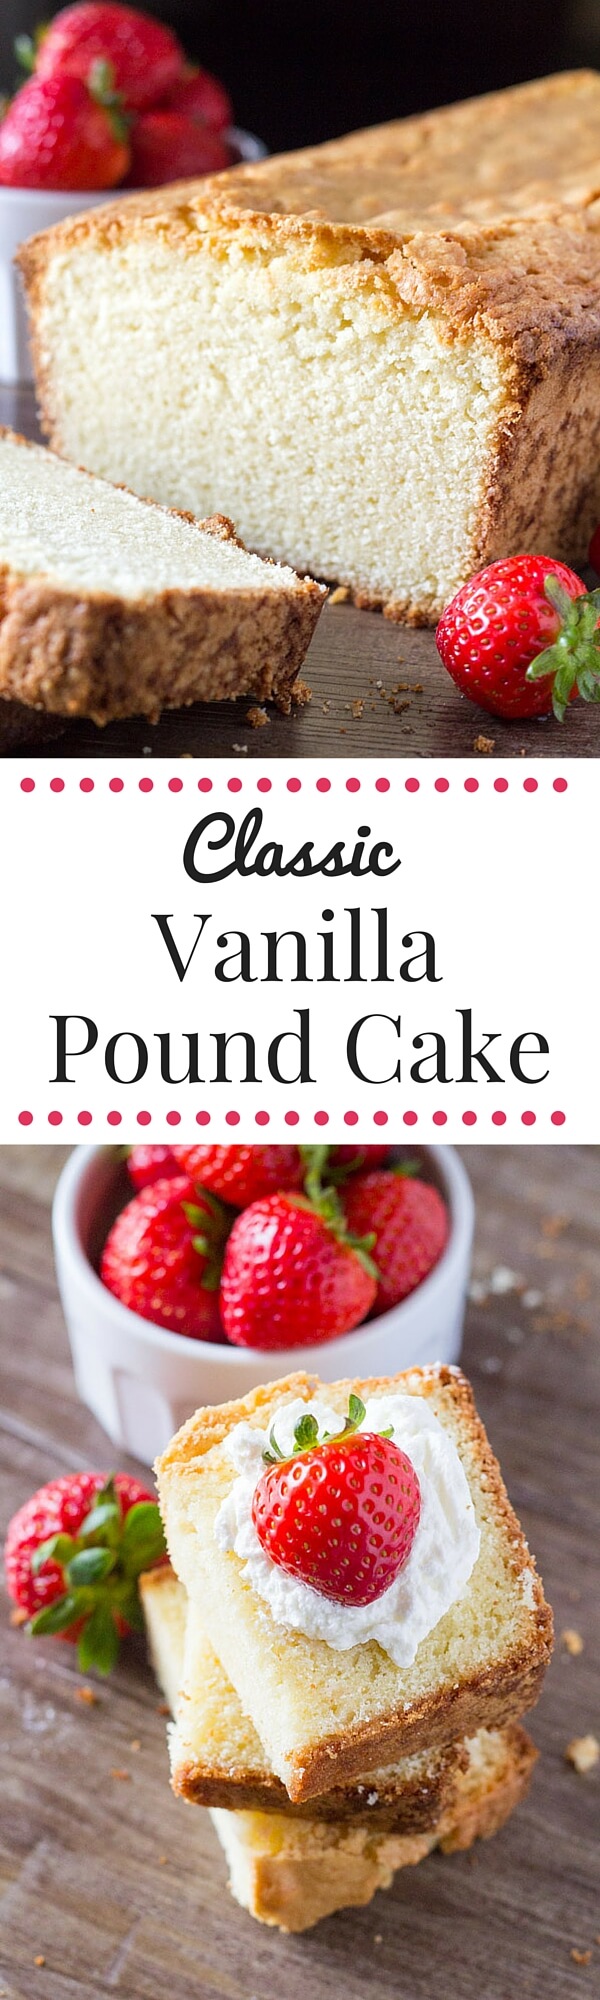 Seriously tender, deliciously buttery, perfectly moist Vanilla Pound Cake. Serve it with fresh fruit and whipped cream for dessert, or have a slice with your morning coffee. Learn the secrets to making this classic cake.